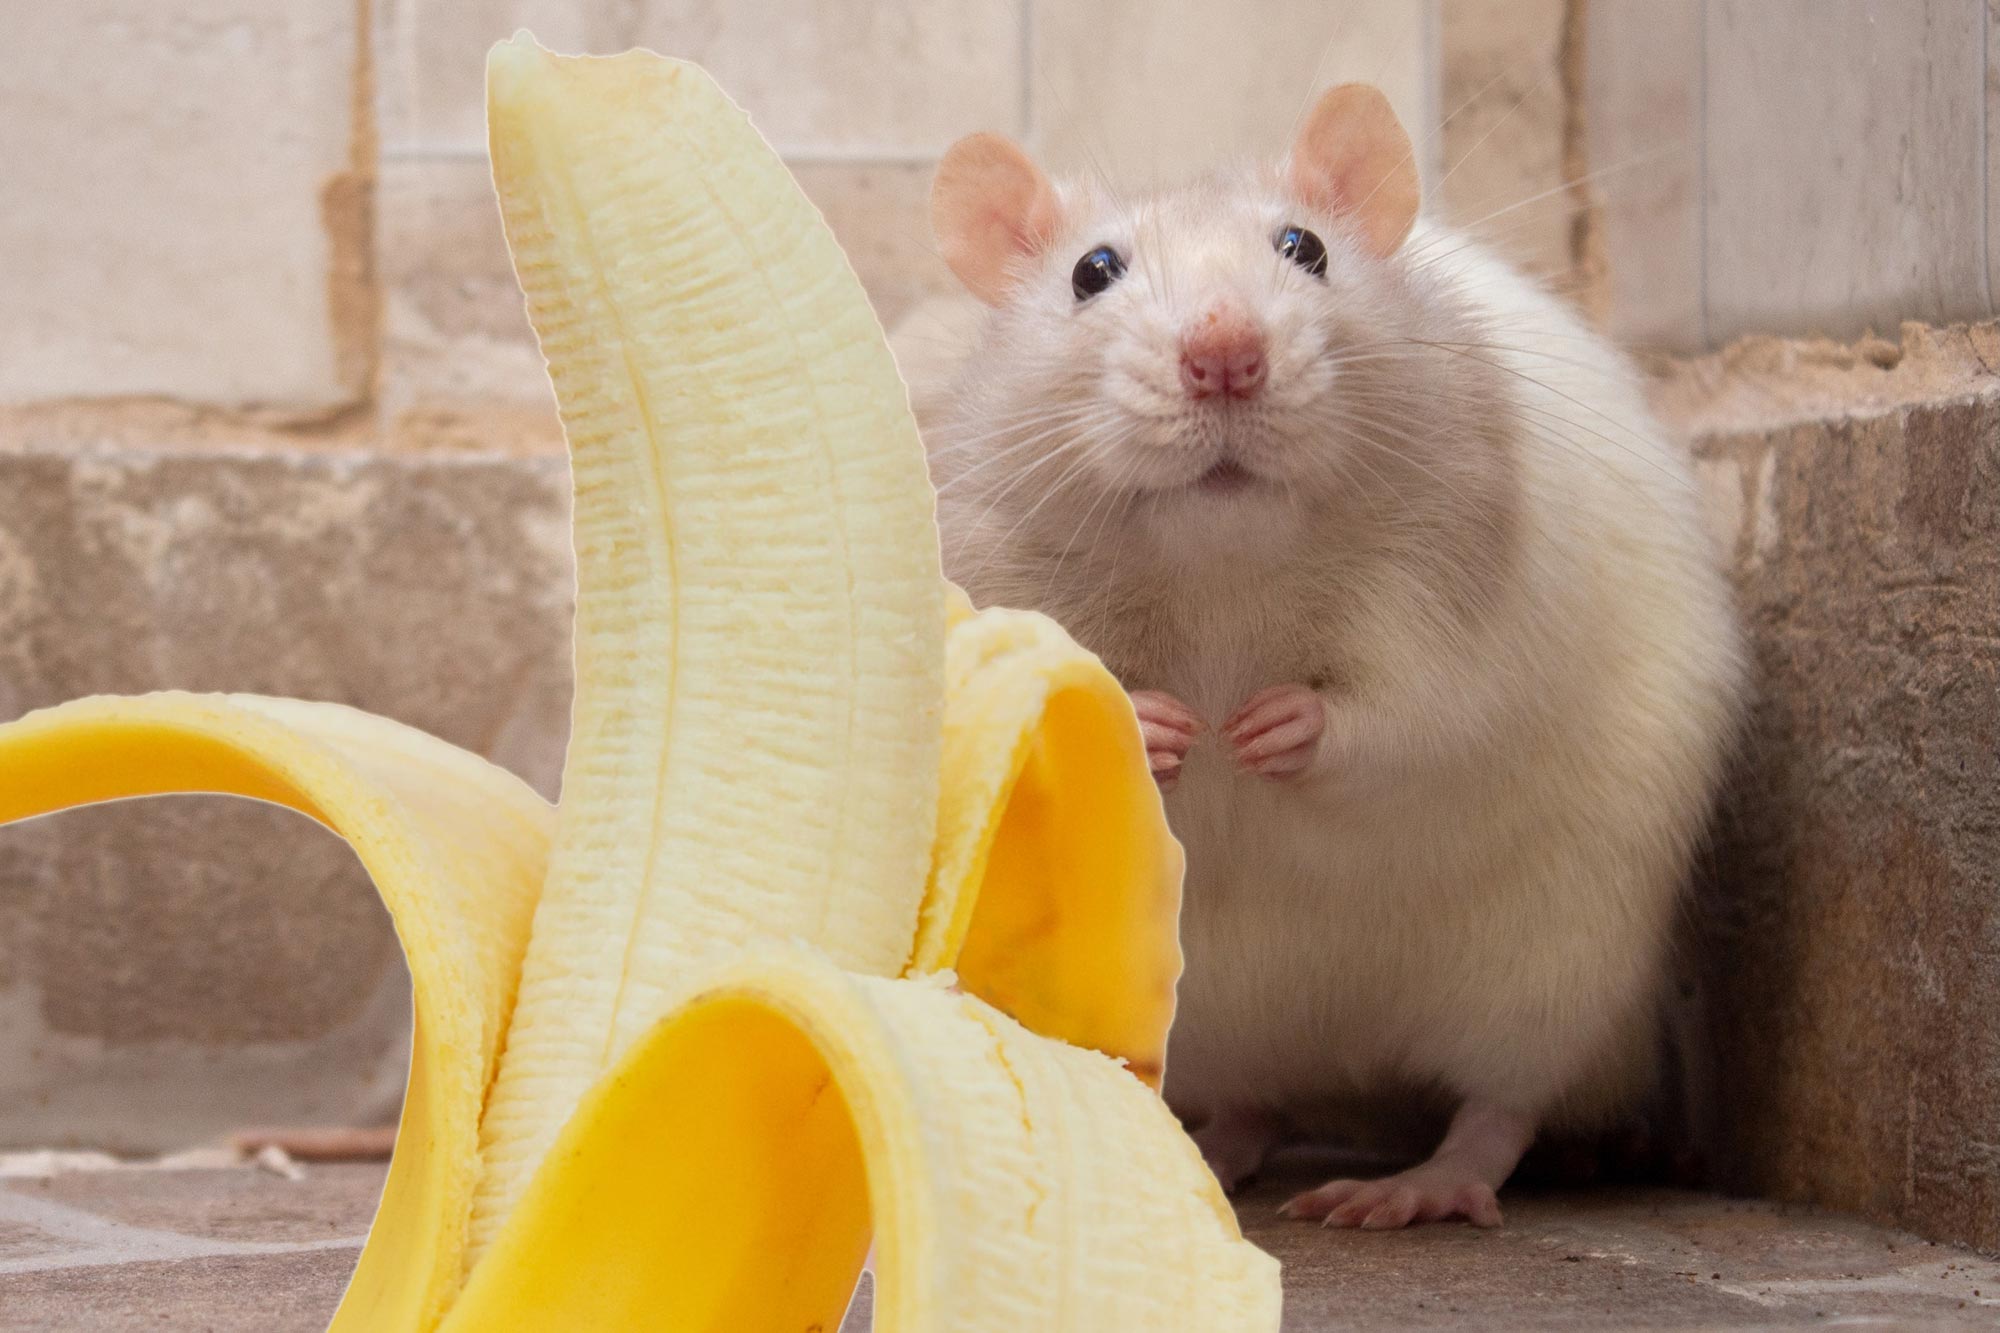 Why Are Mice Afraid of Bananas?